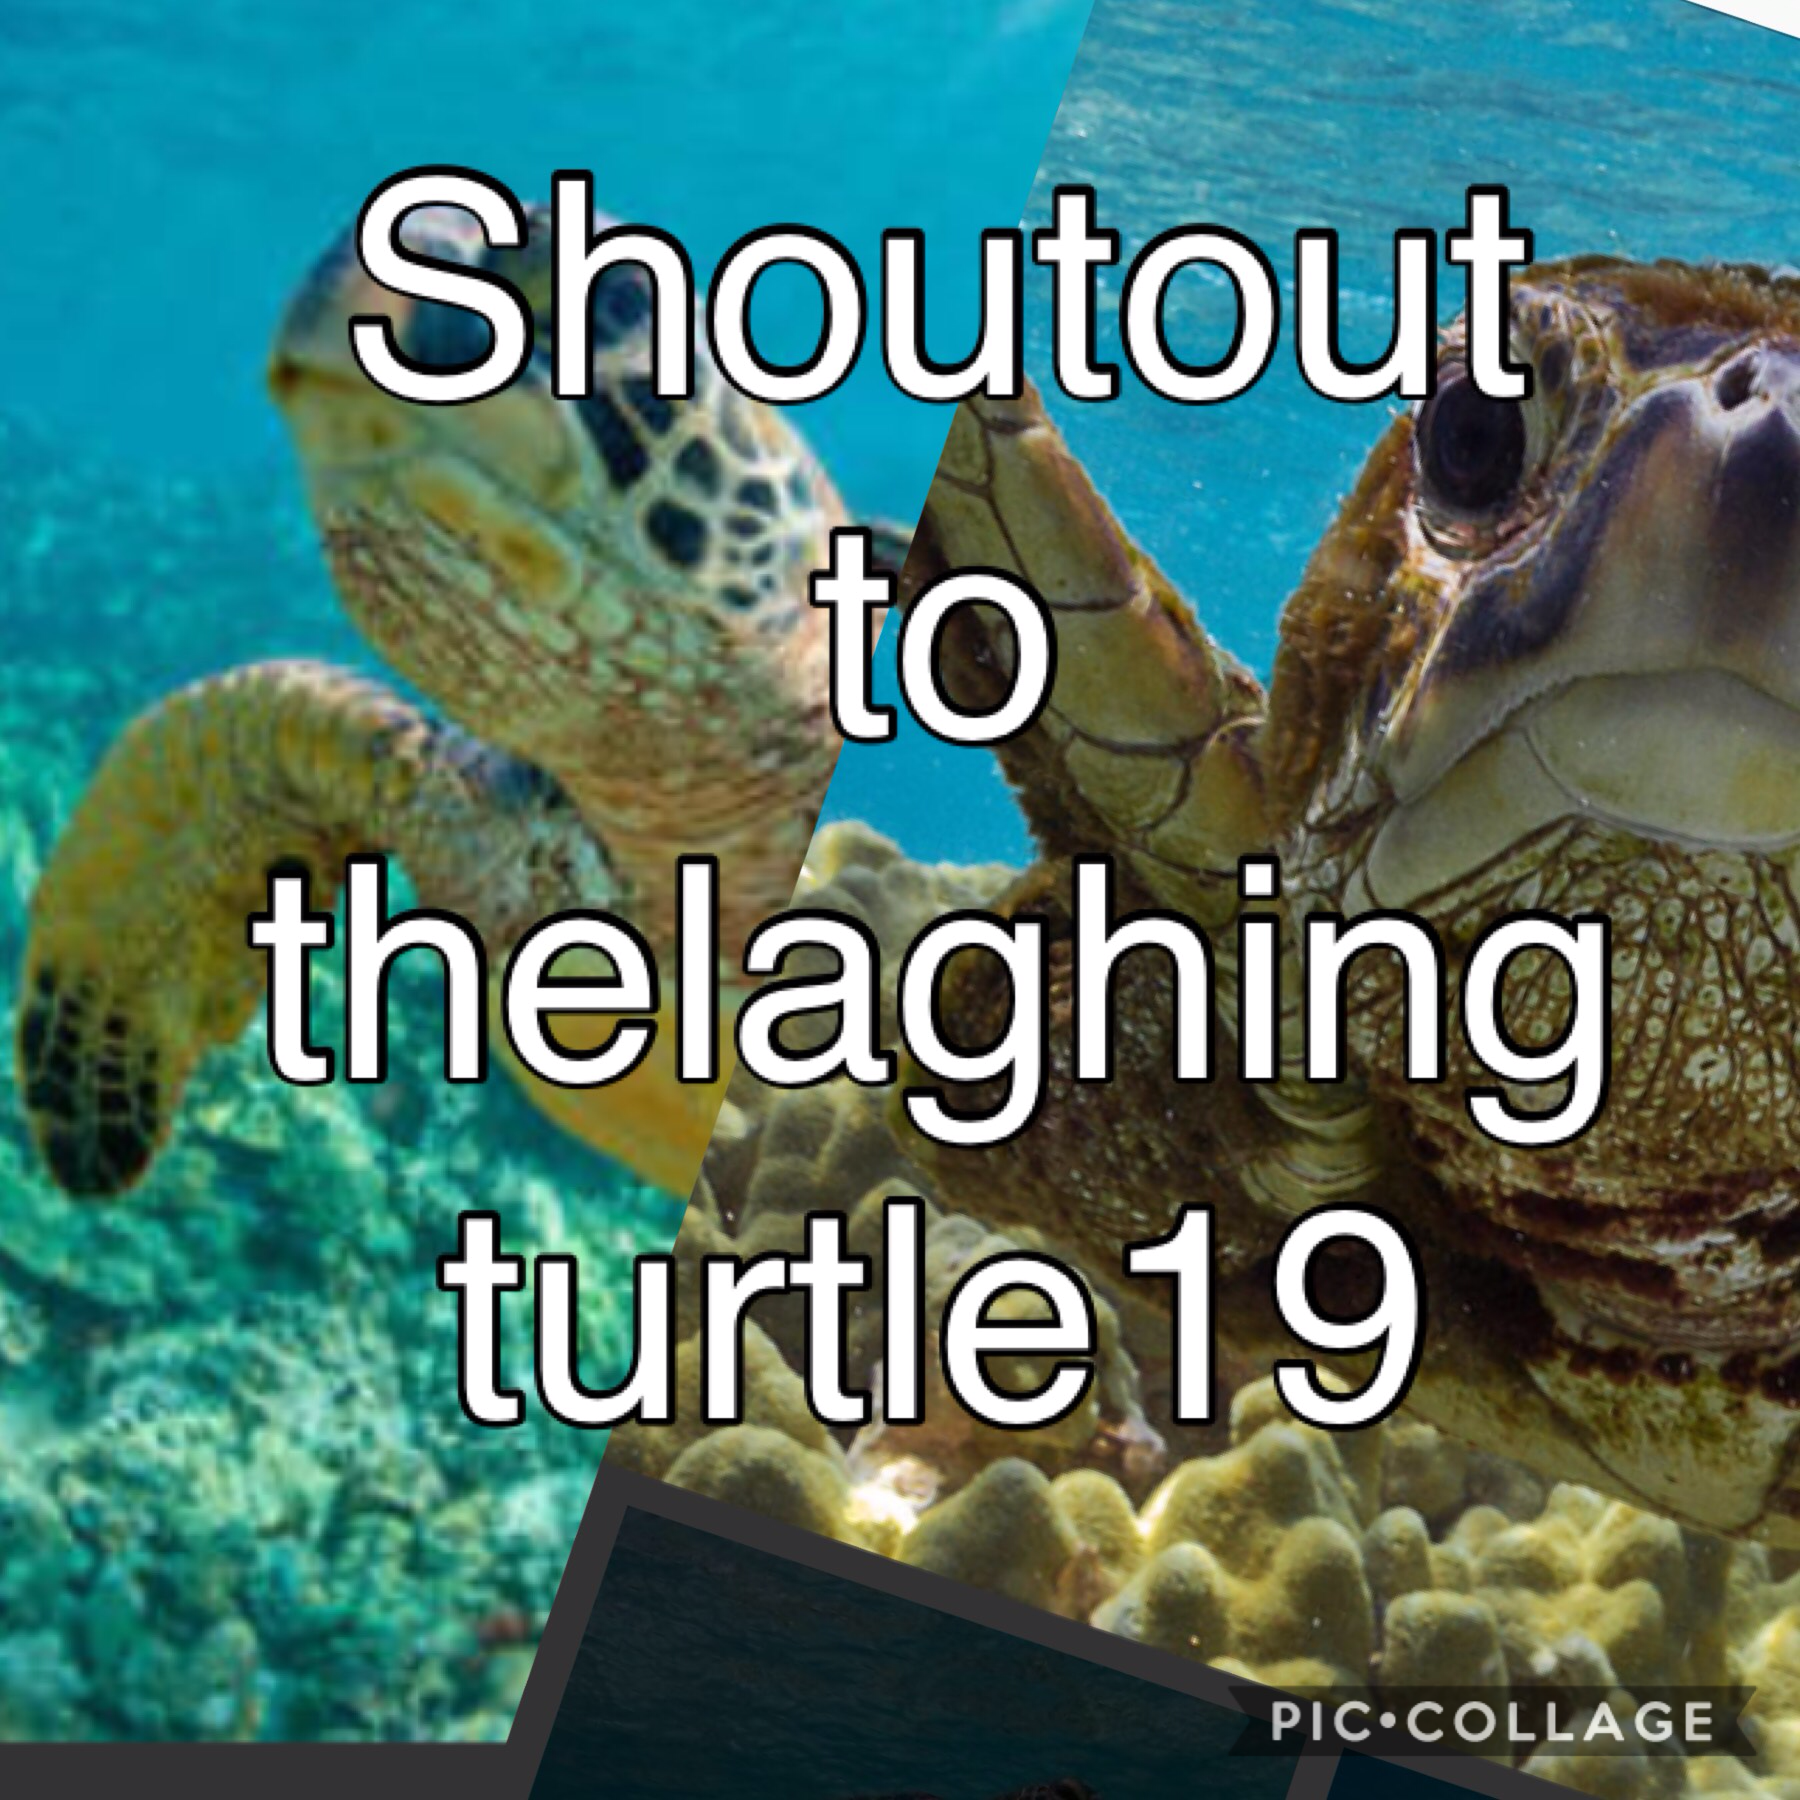 Shoutout to
Thelaghingturtle19